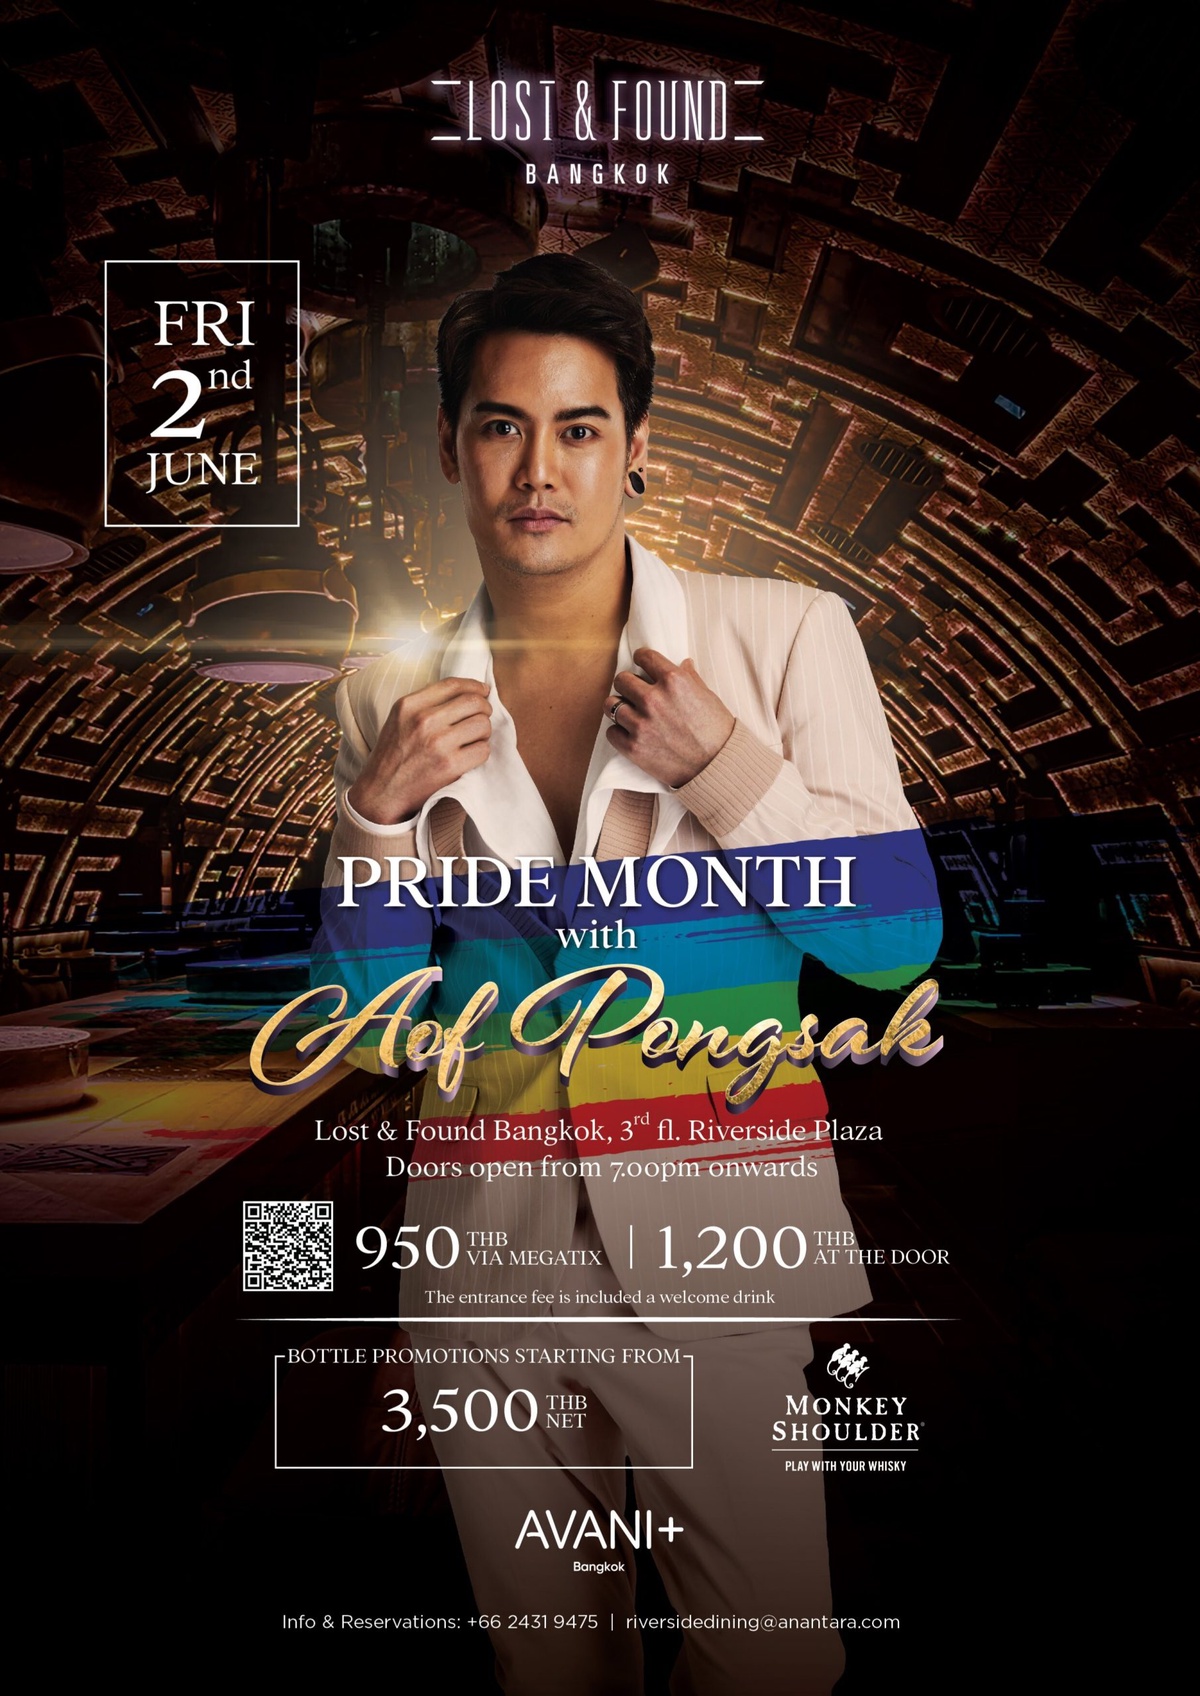 Pride Month at Lost Found with Aof Pongsak